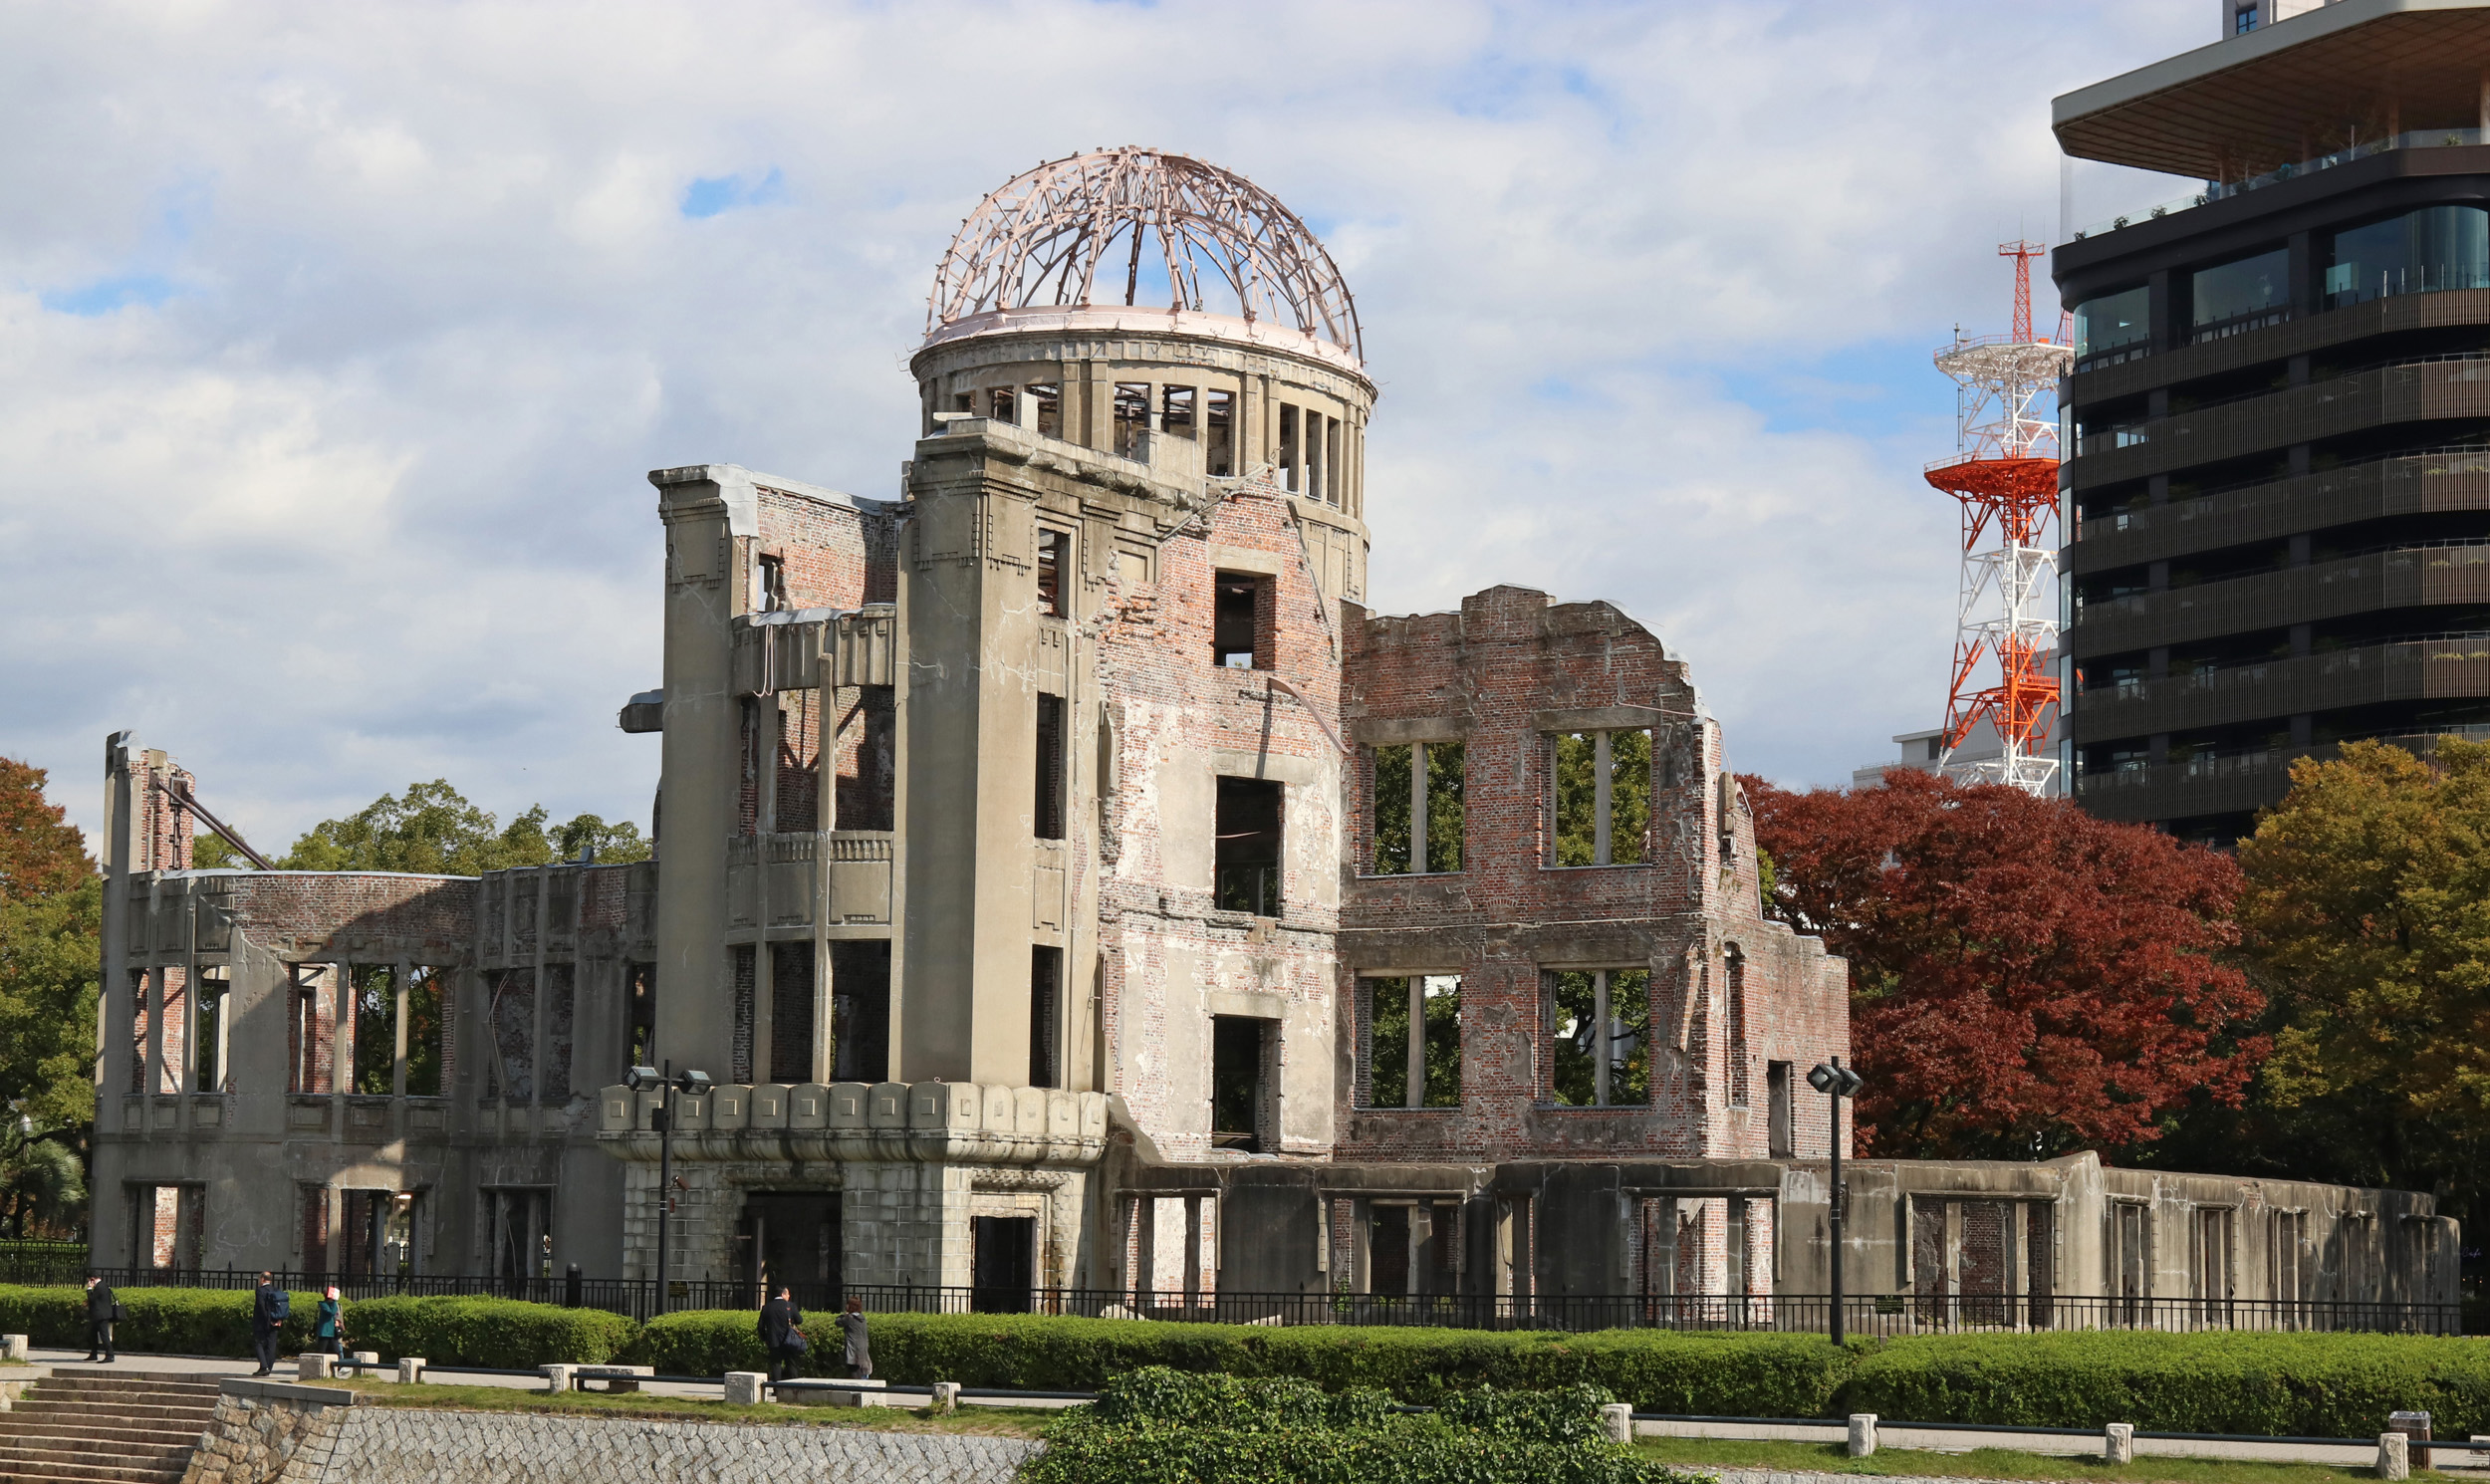 A-Bomb Dome crop